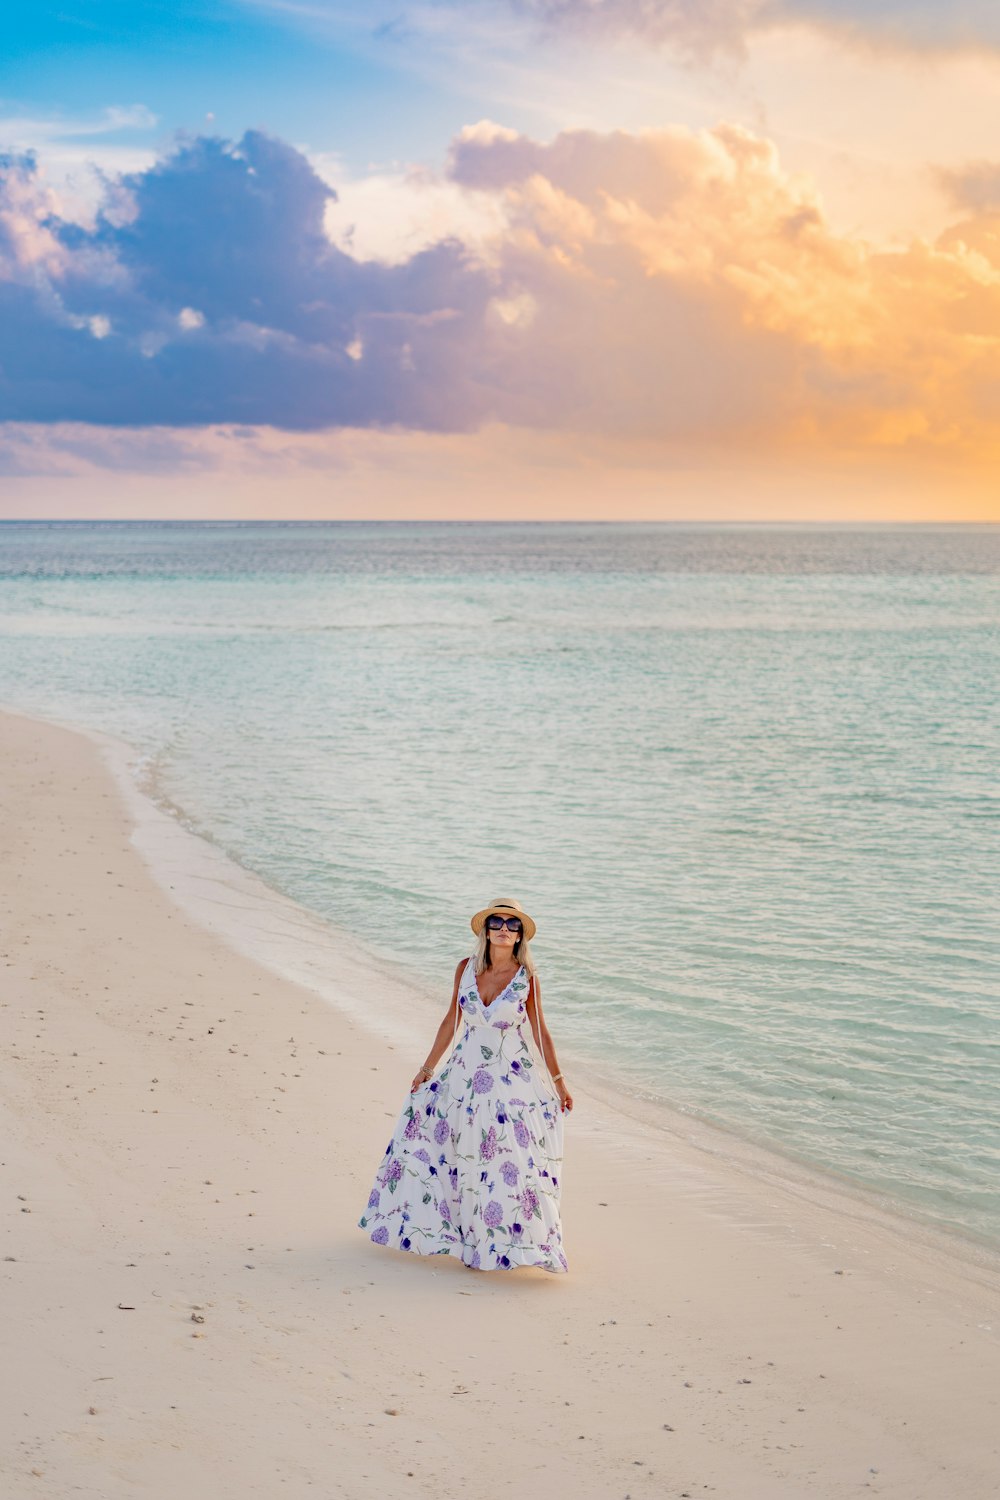 a woman in a dress and hat walking on a beach